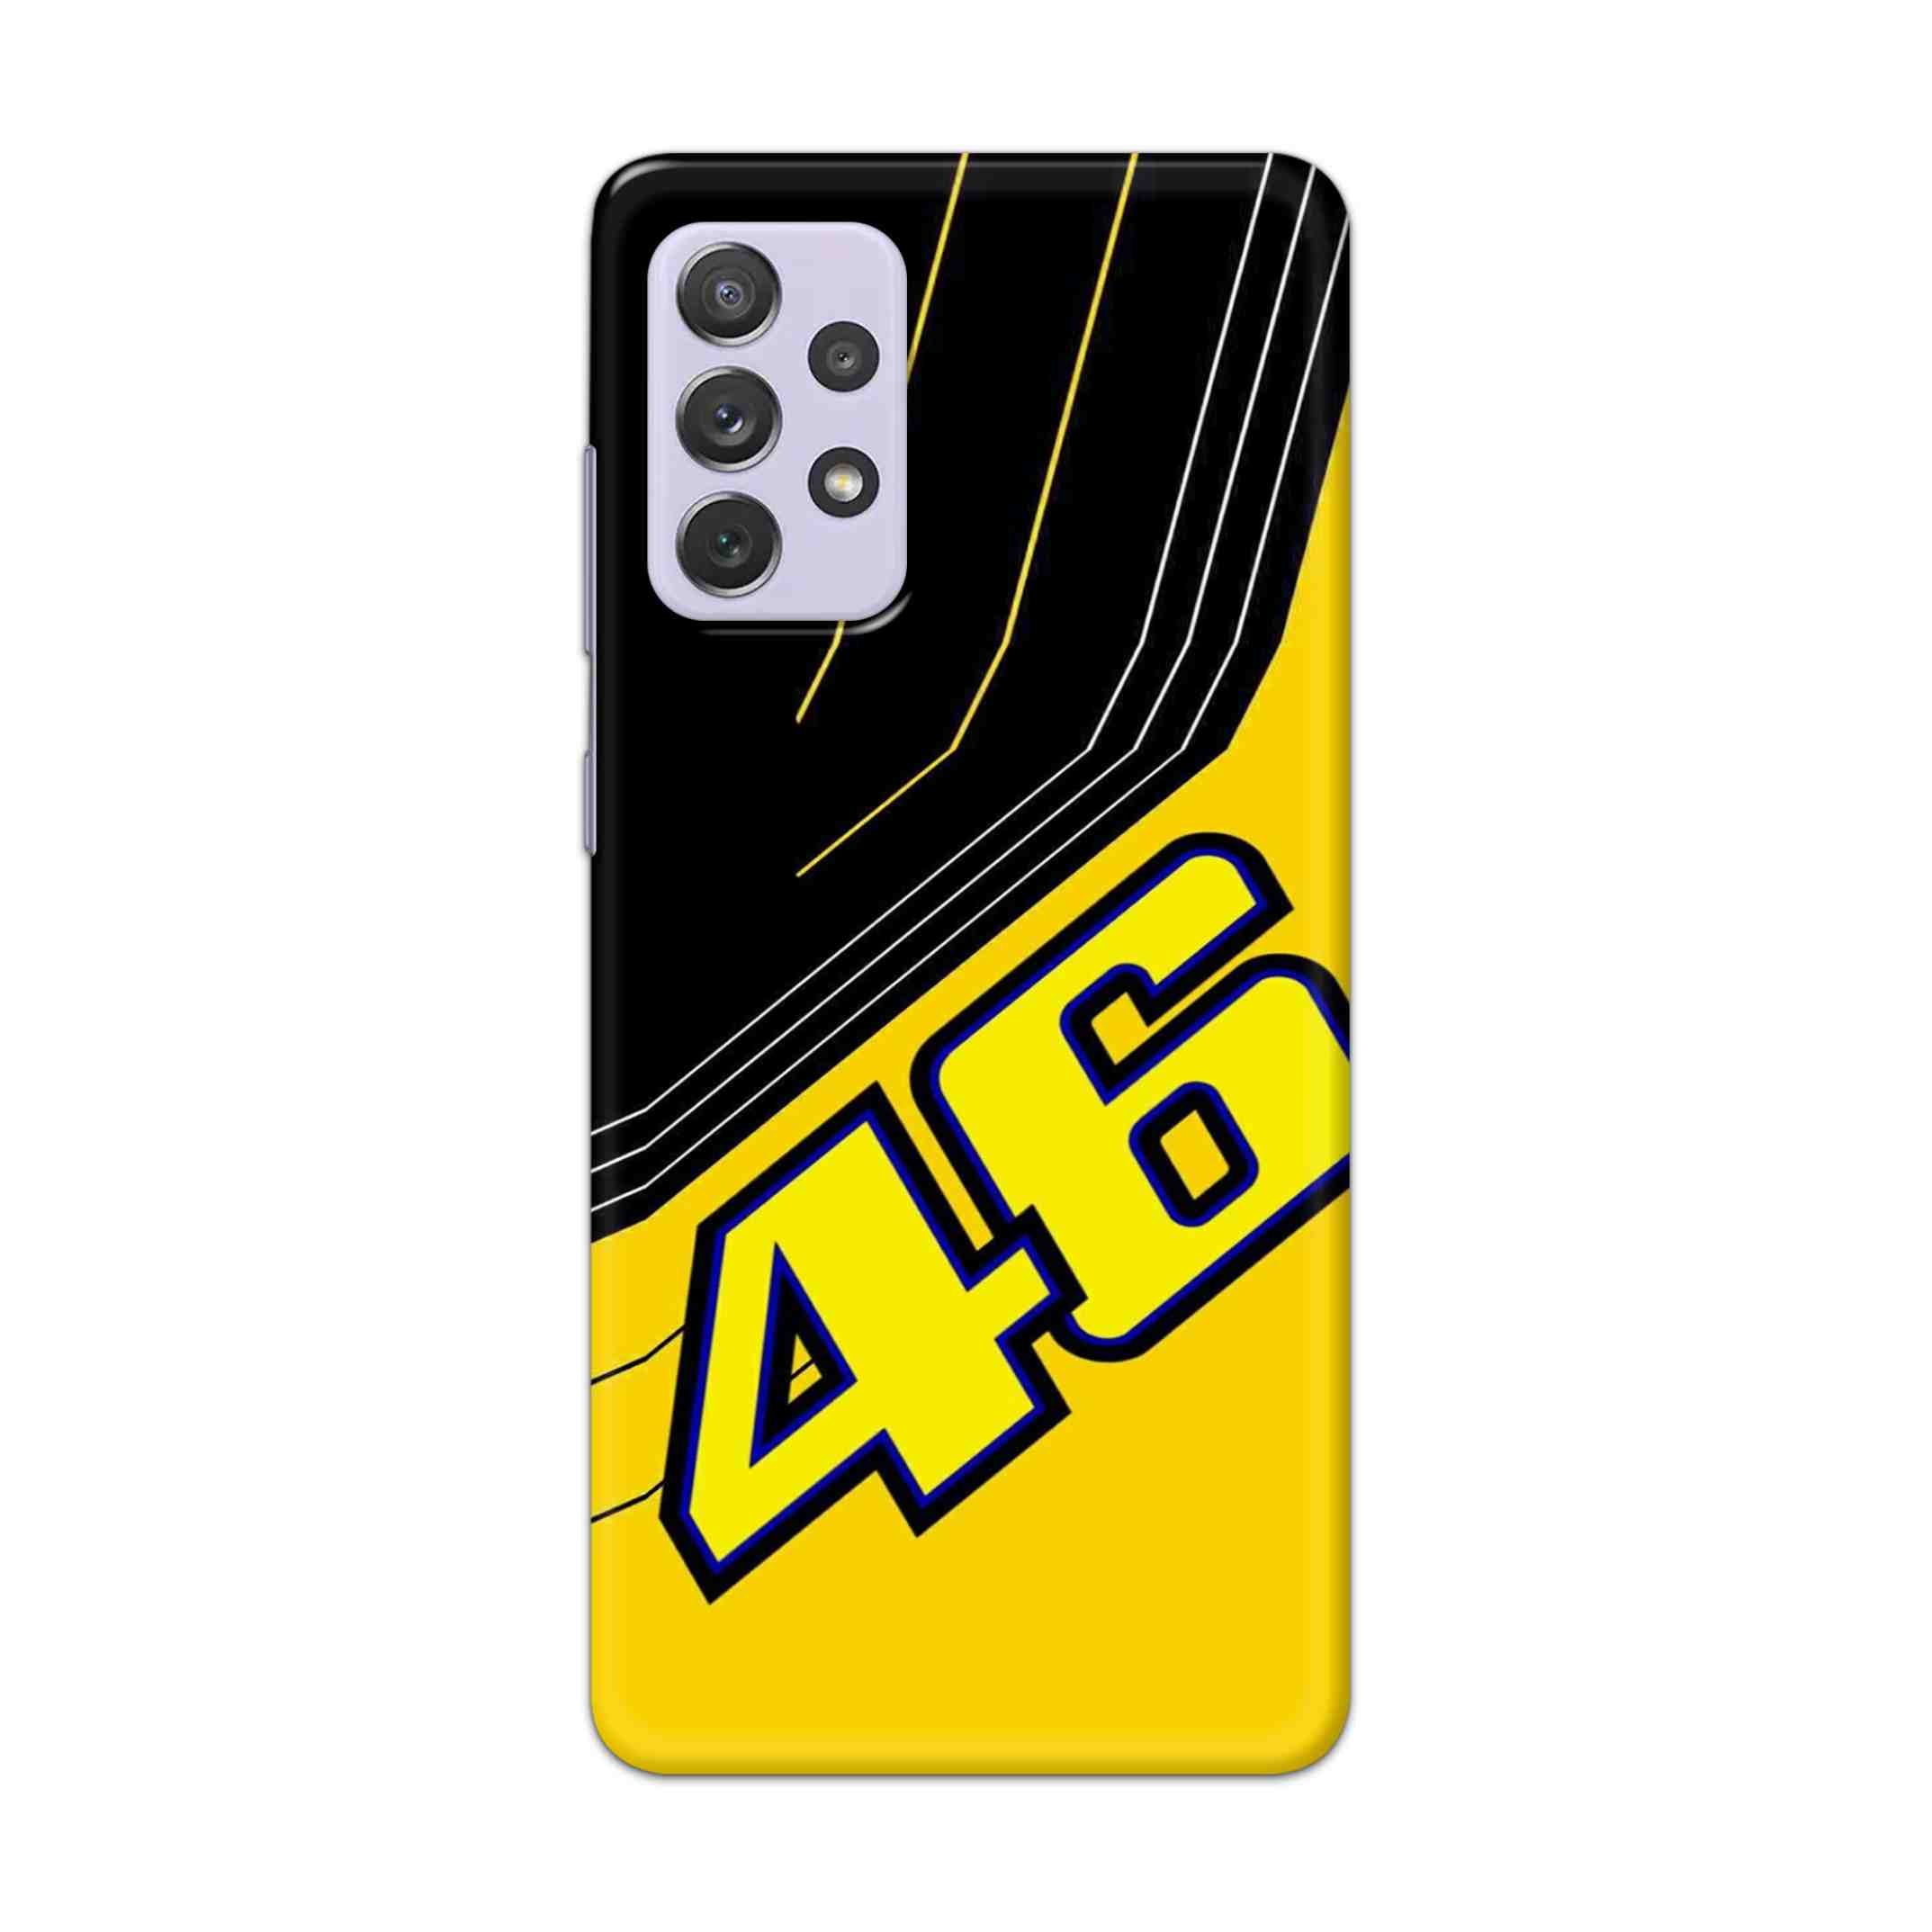 Buy 46 Hard Back Mobile Phone Case Cover For Samsung Galaxy A72 Online